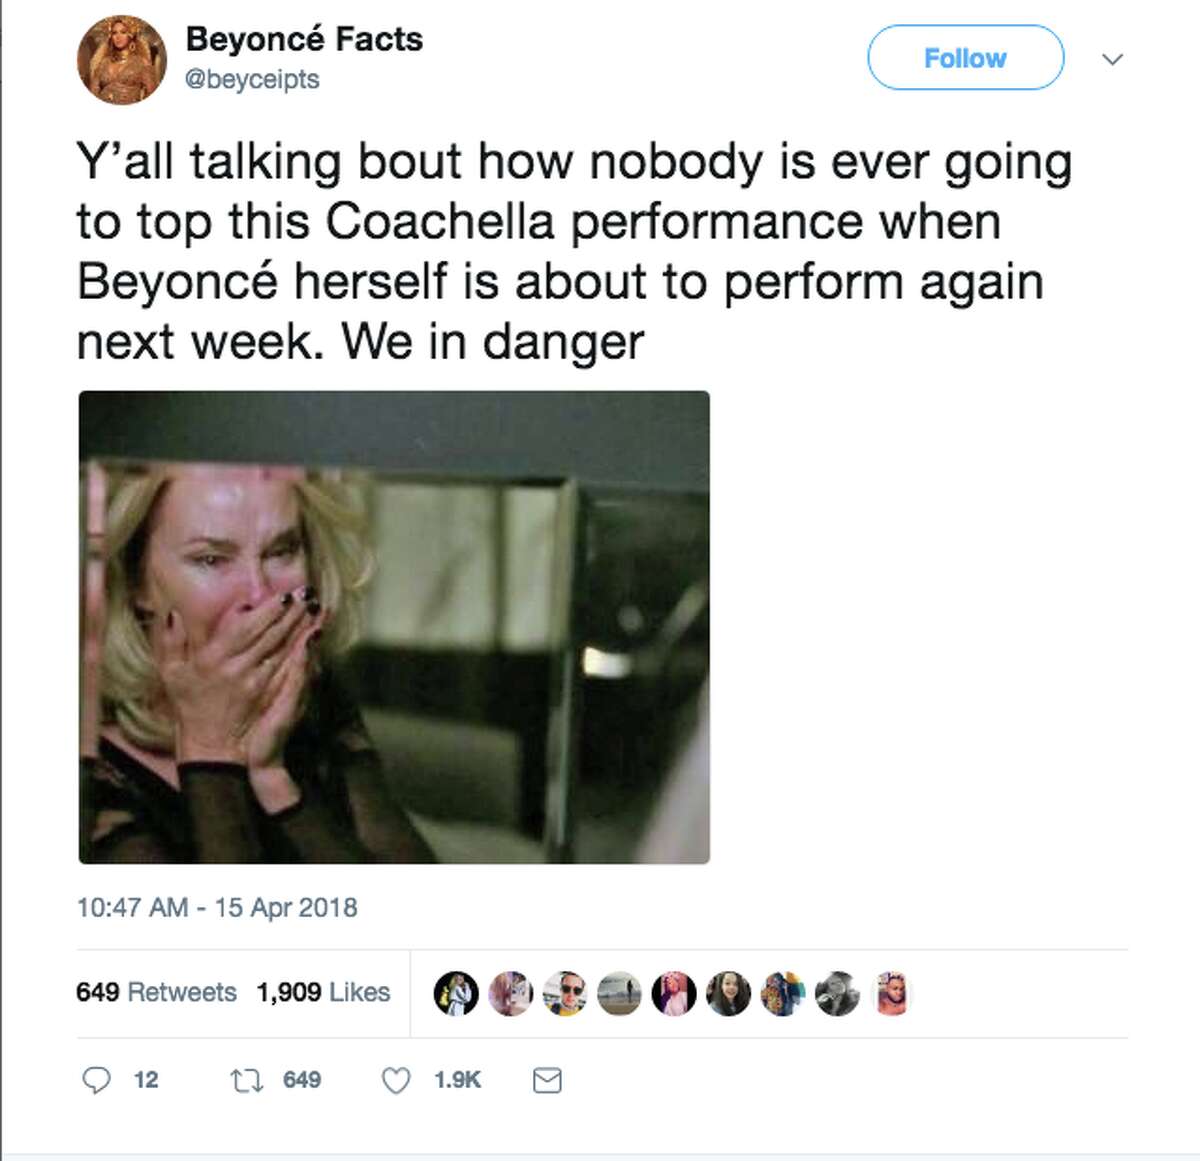 Fans reacted to Beyonce's historic headlining performance at the 2018 Coachella Valley Music and Arts Festival.